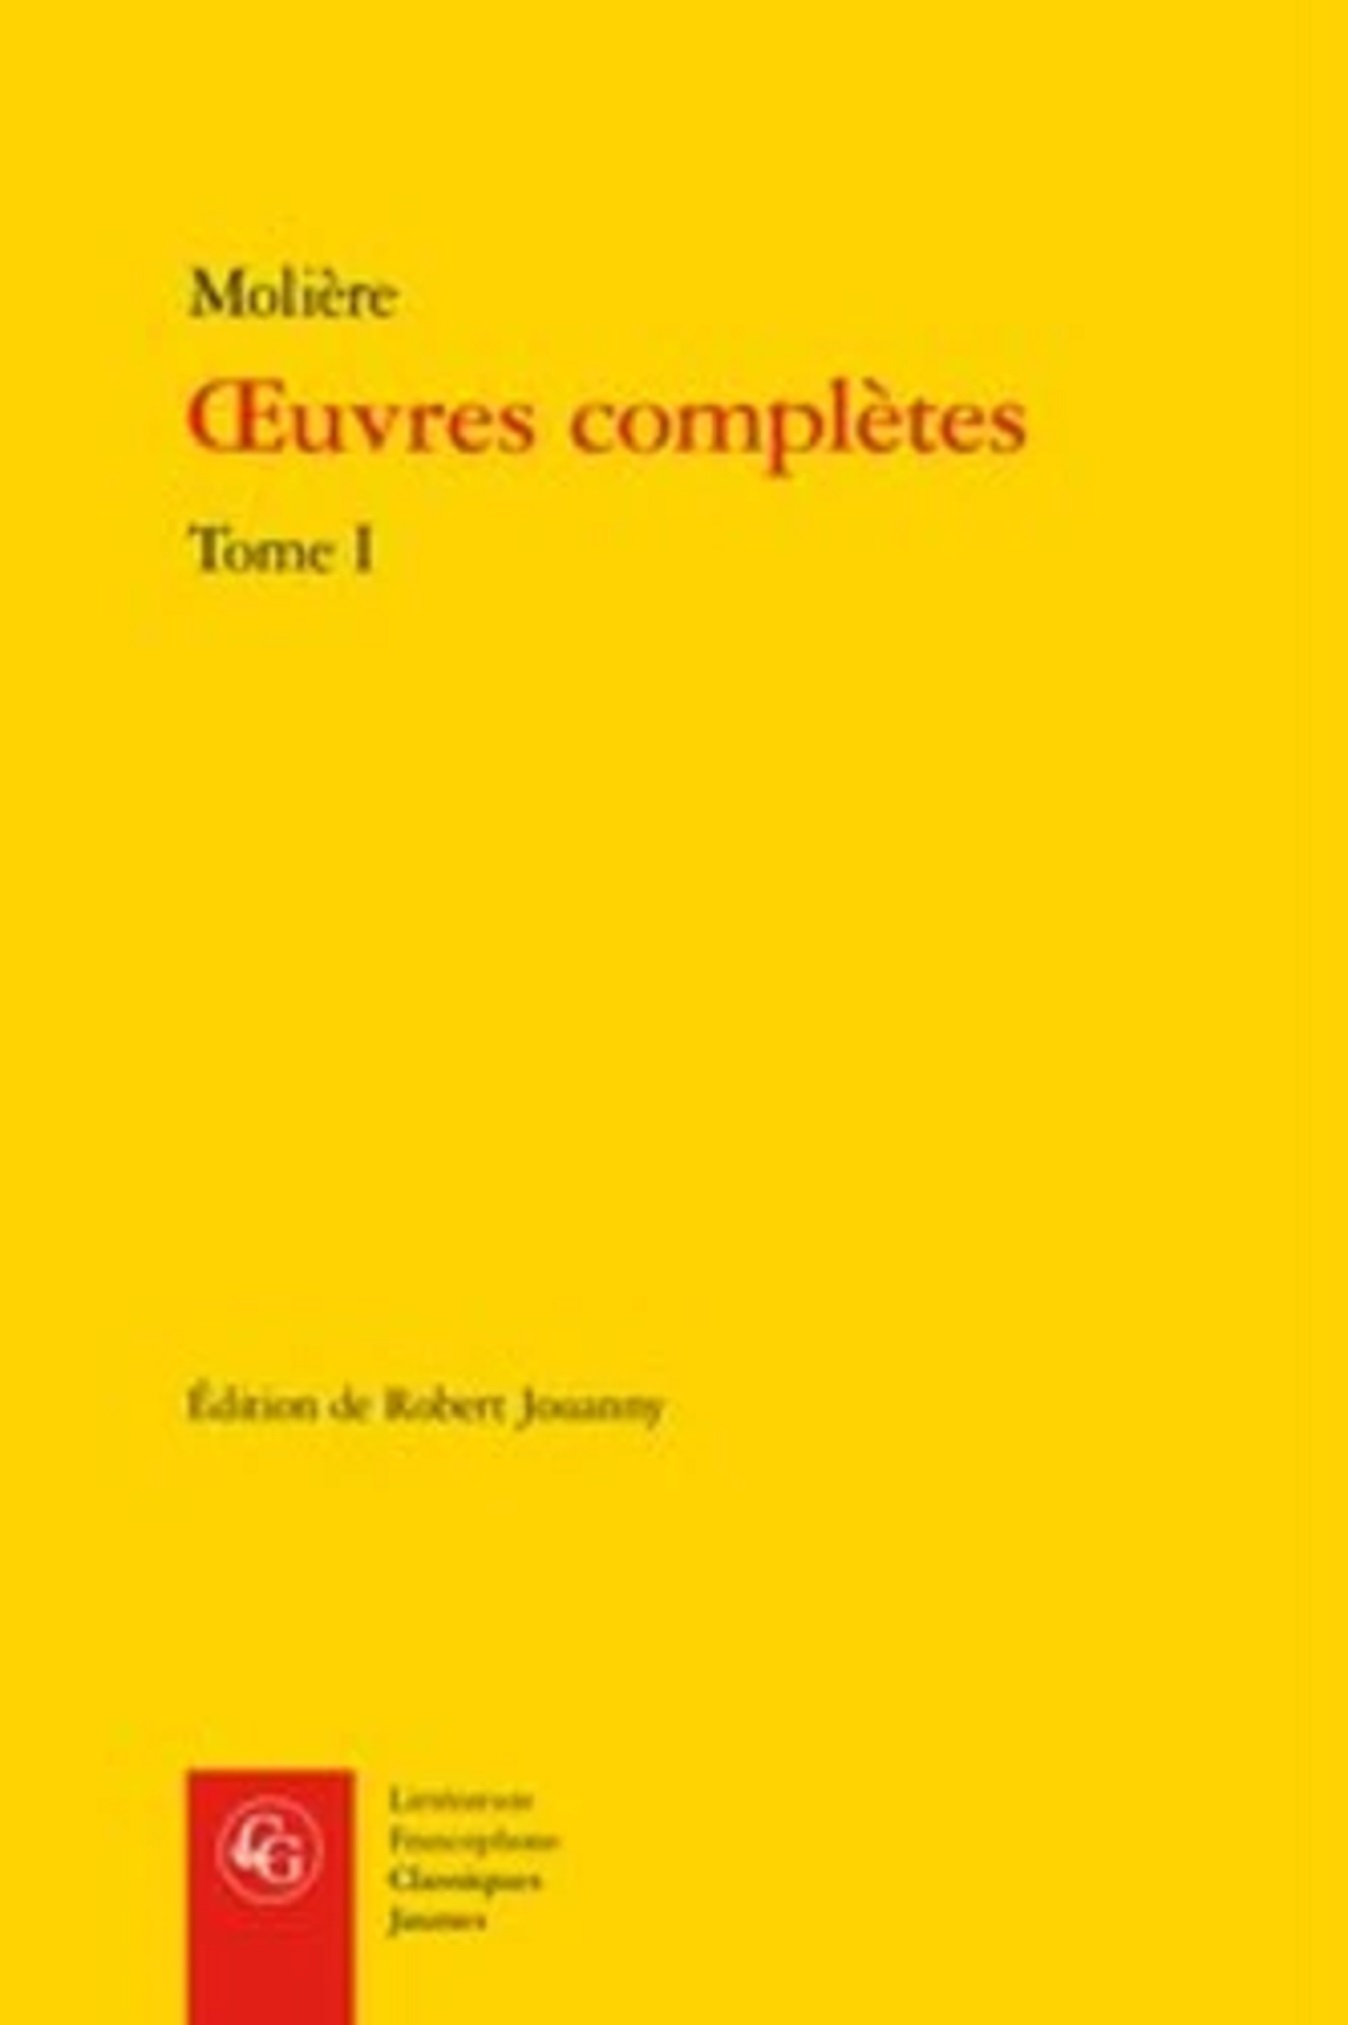 Oeuvres completes - Tome 1 | Moliere